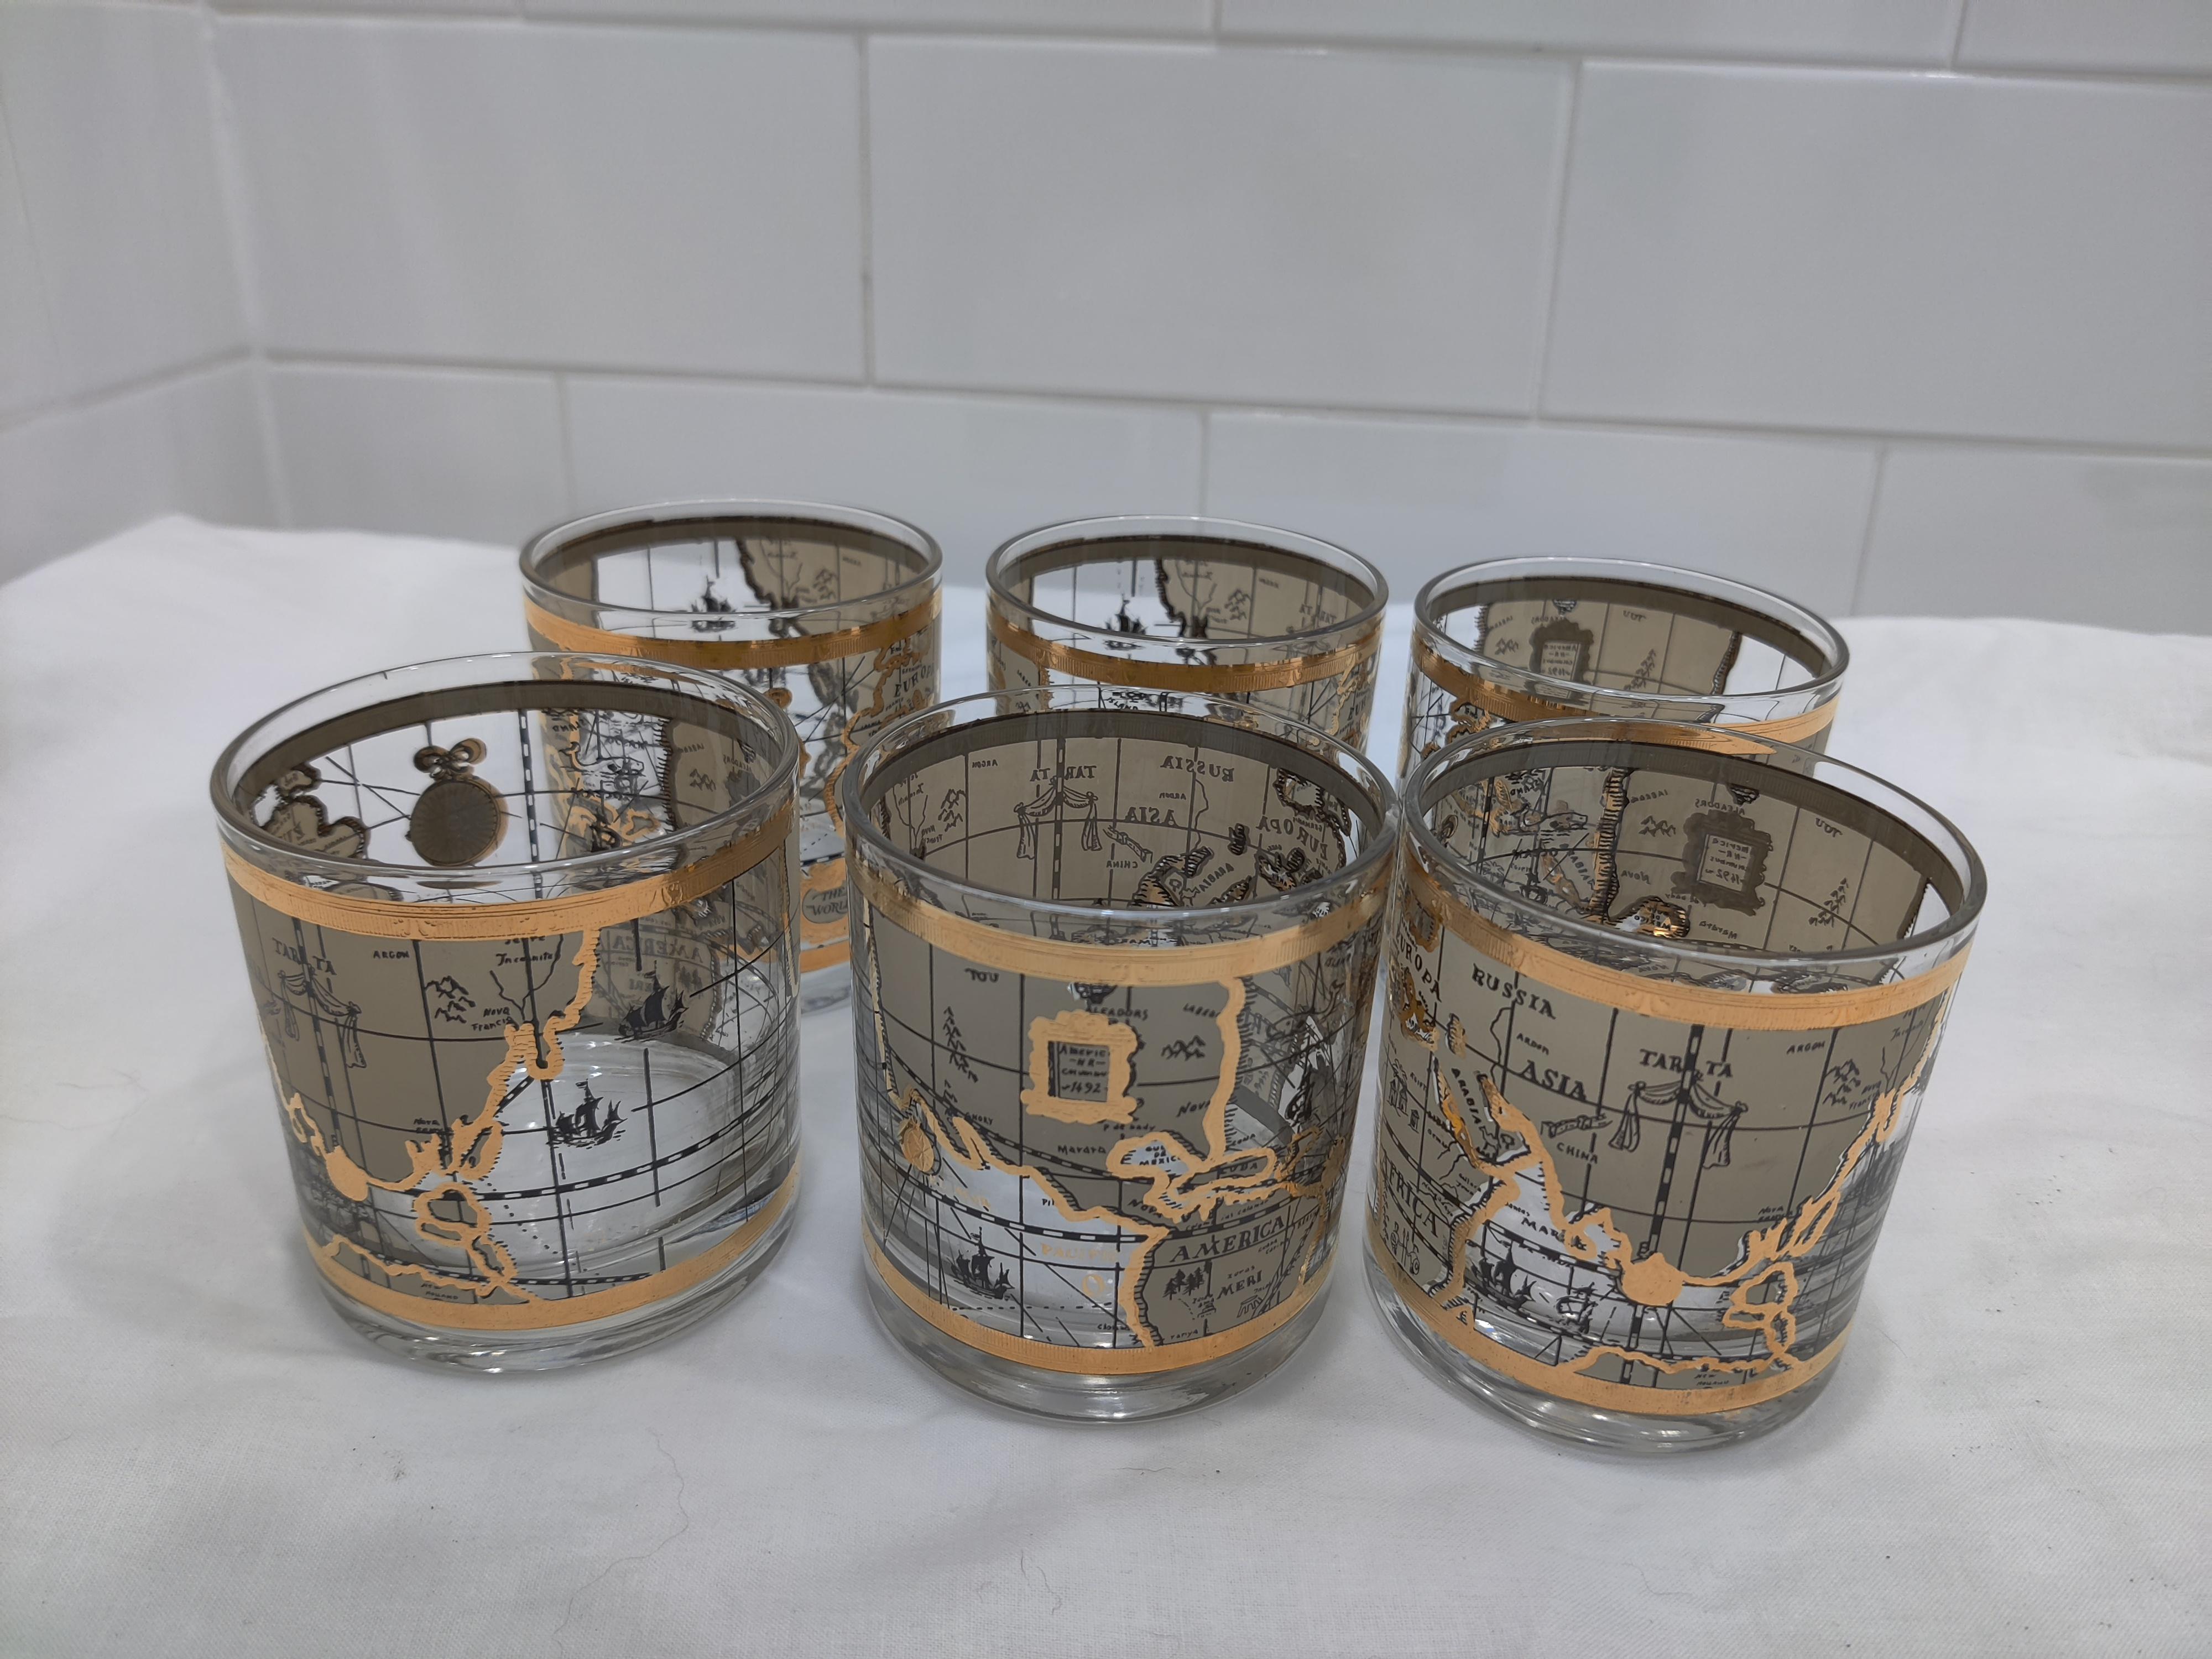 Set of 6 Mid Century Cera 22K Gold World Atlas Old Fashioned Rock Glasses
Good Condition
Little or no ware
Gold is intact